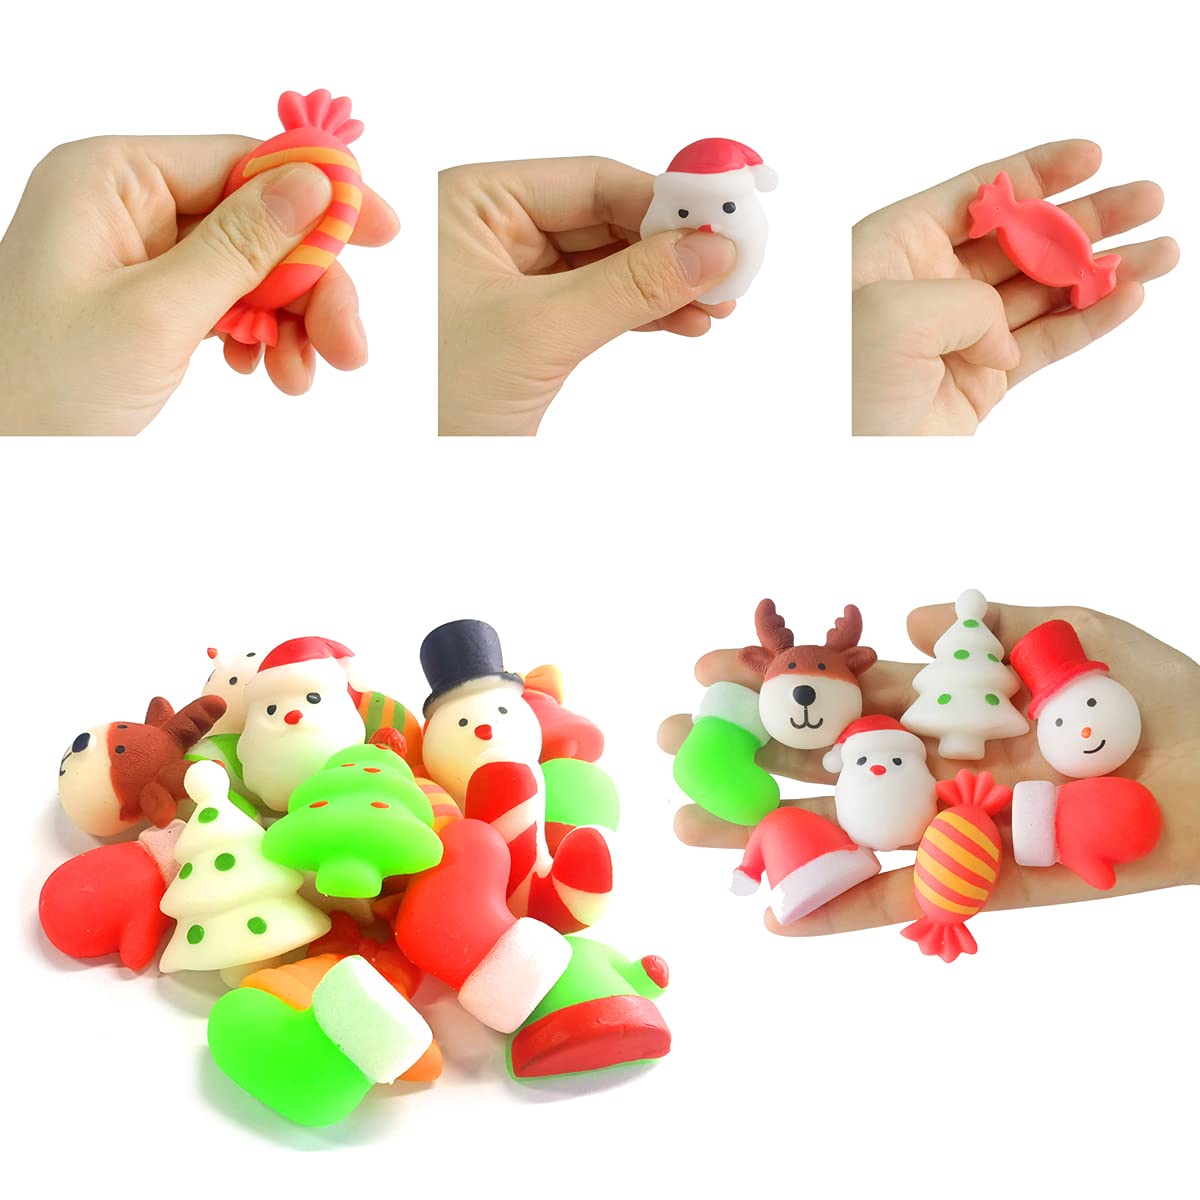 48 Pcs Christmas Mochi Squishy Toys,Mini Kawaii Squeeze Toy Stress Reliever Anxiety Packs for Kid Party Favors,Christmas Miniatures (Christmas)